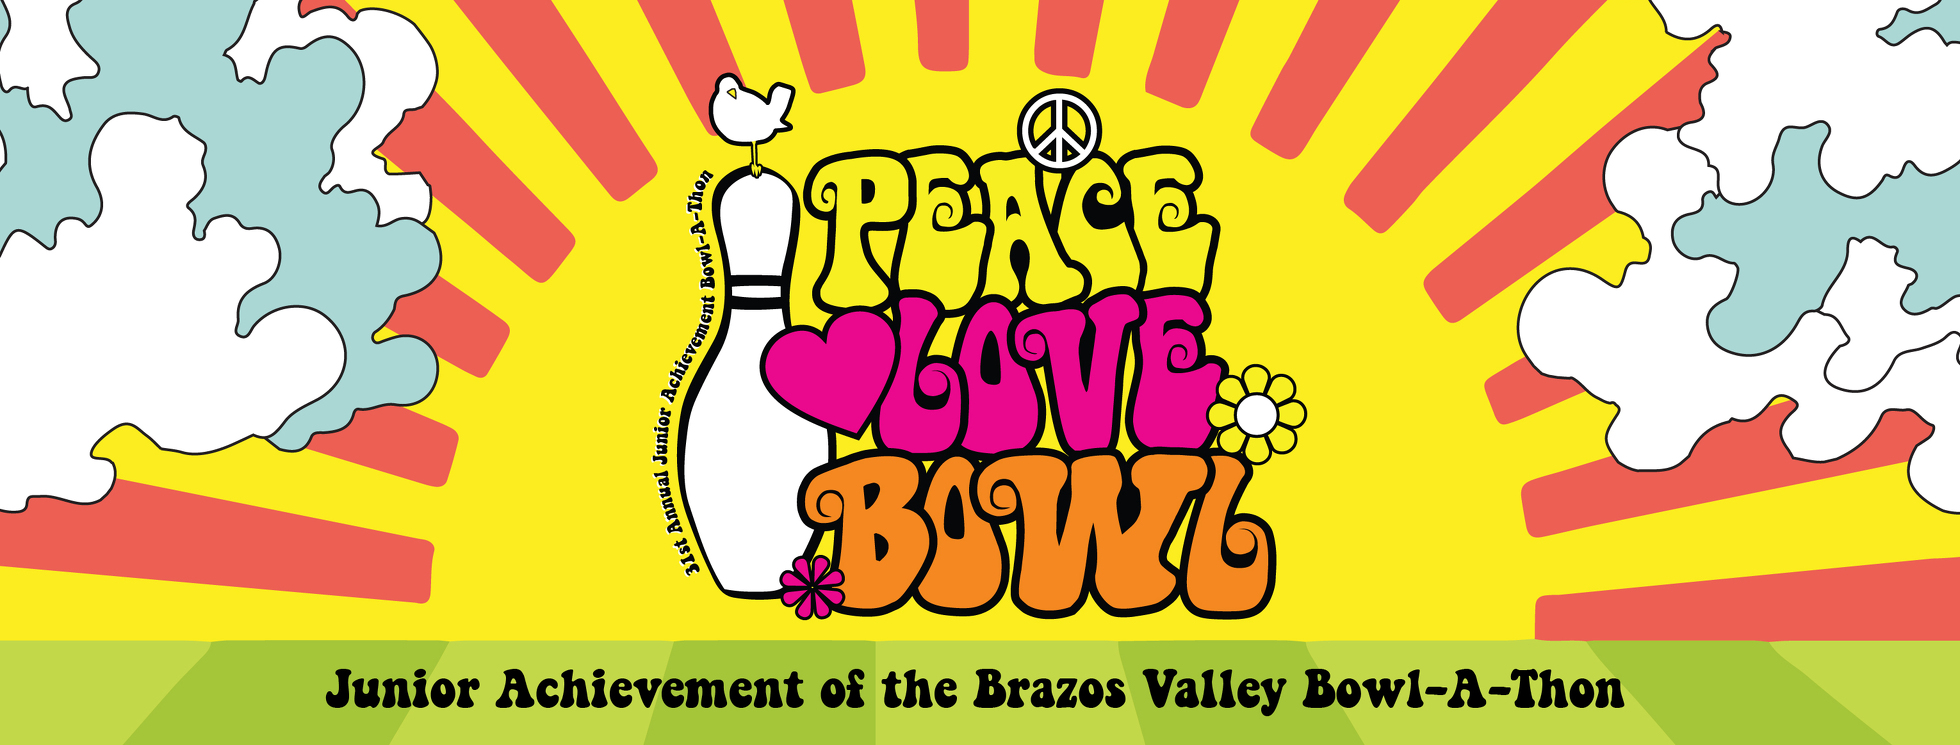 Junior Achievement of the Brazos Valley Bowl-A-Thon